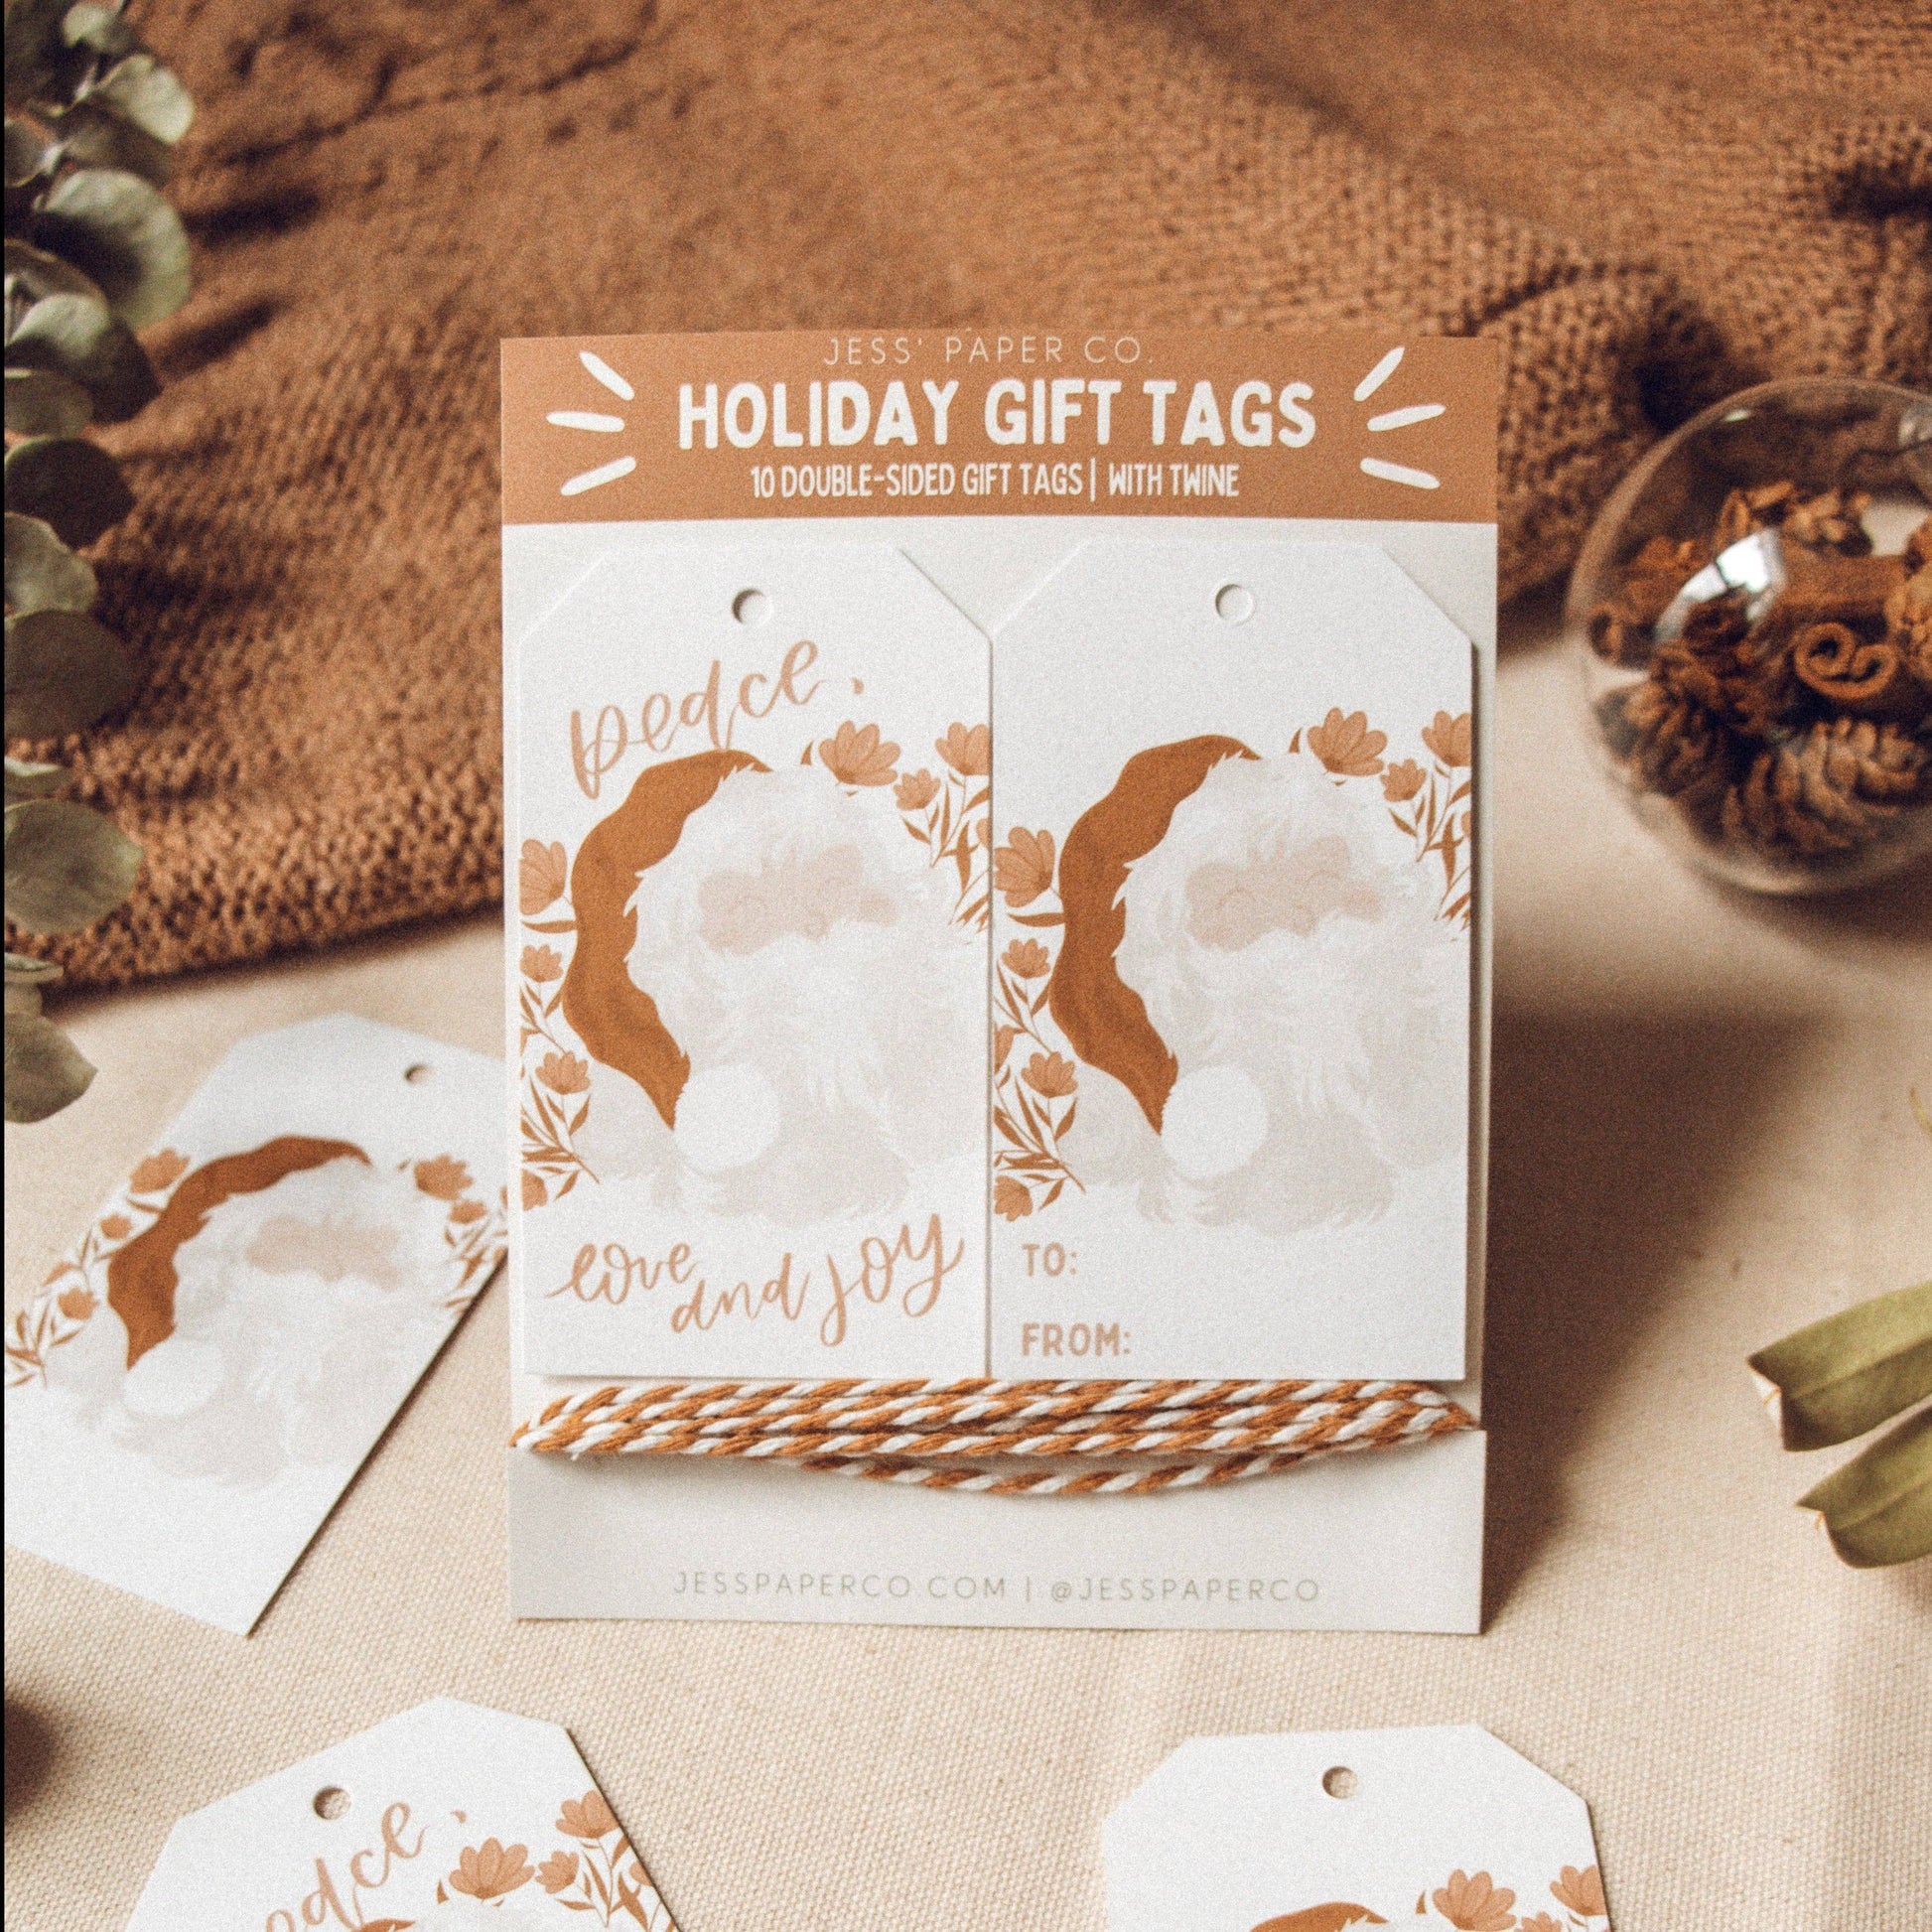 Vintage Santa Holiday Gift Tags with Twine Home Goods Jess' Paper Co.   